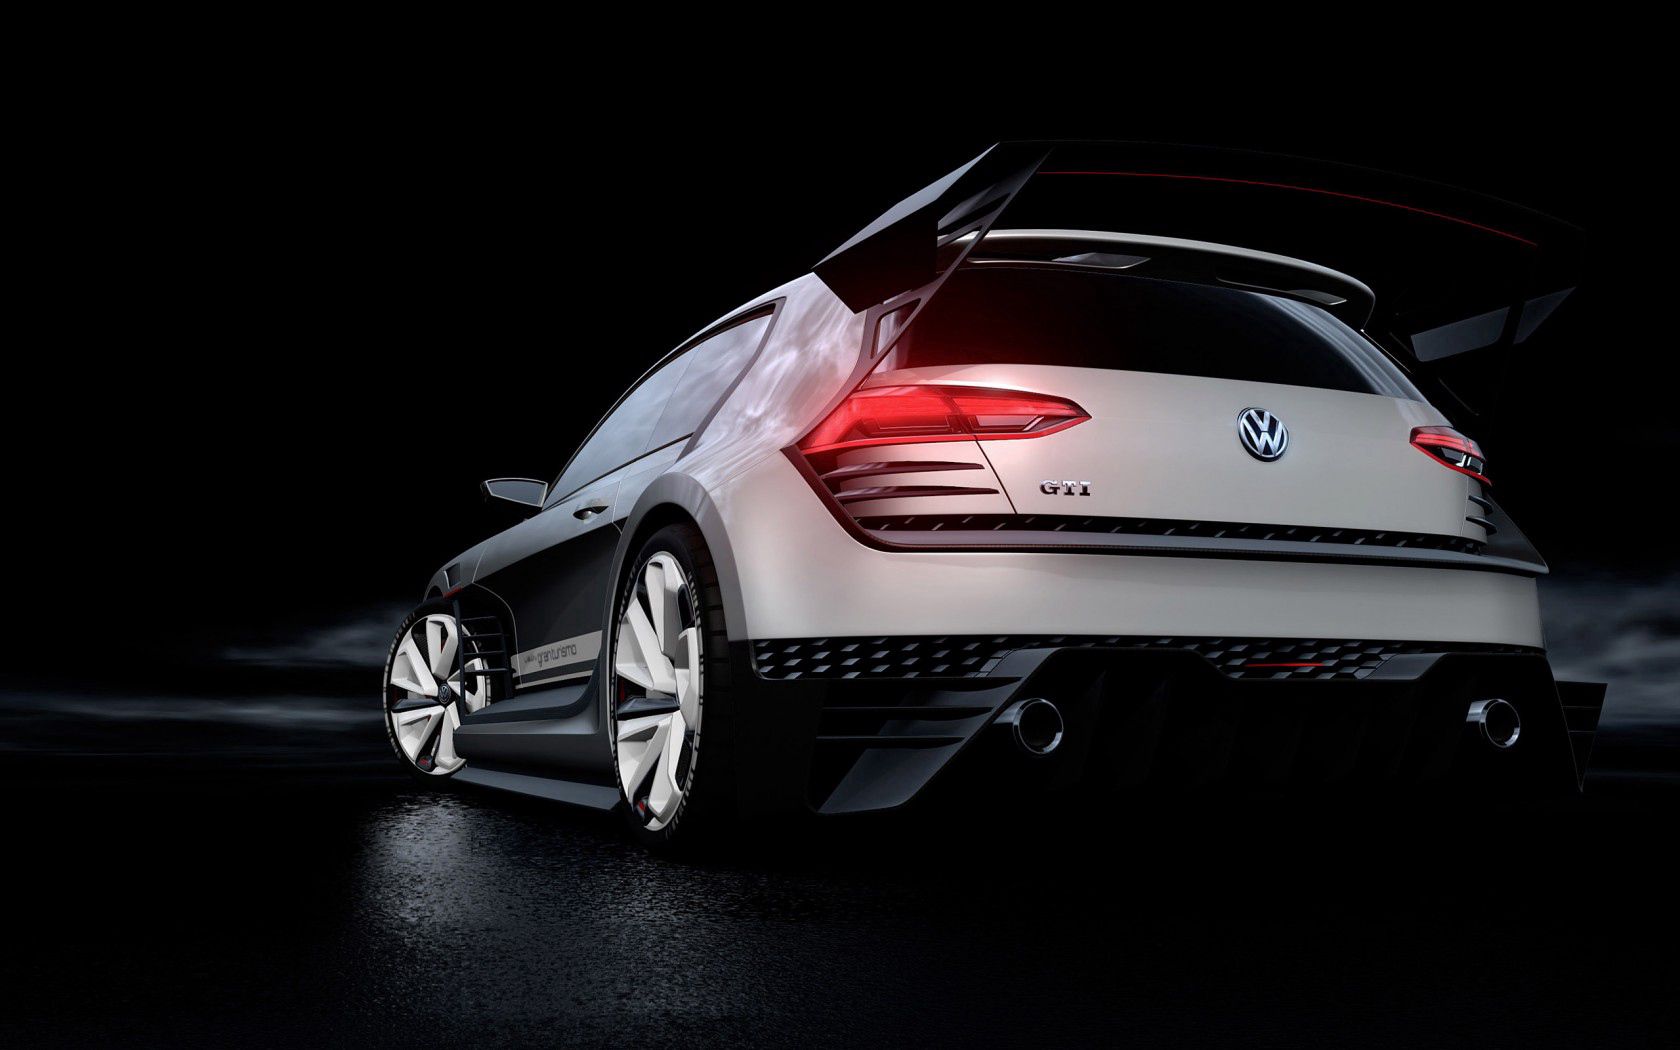 back view, concept, rear view, gti, cars, style, volkswagen